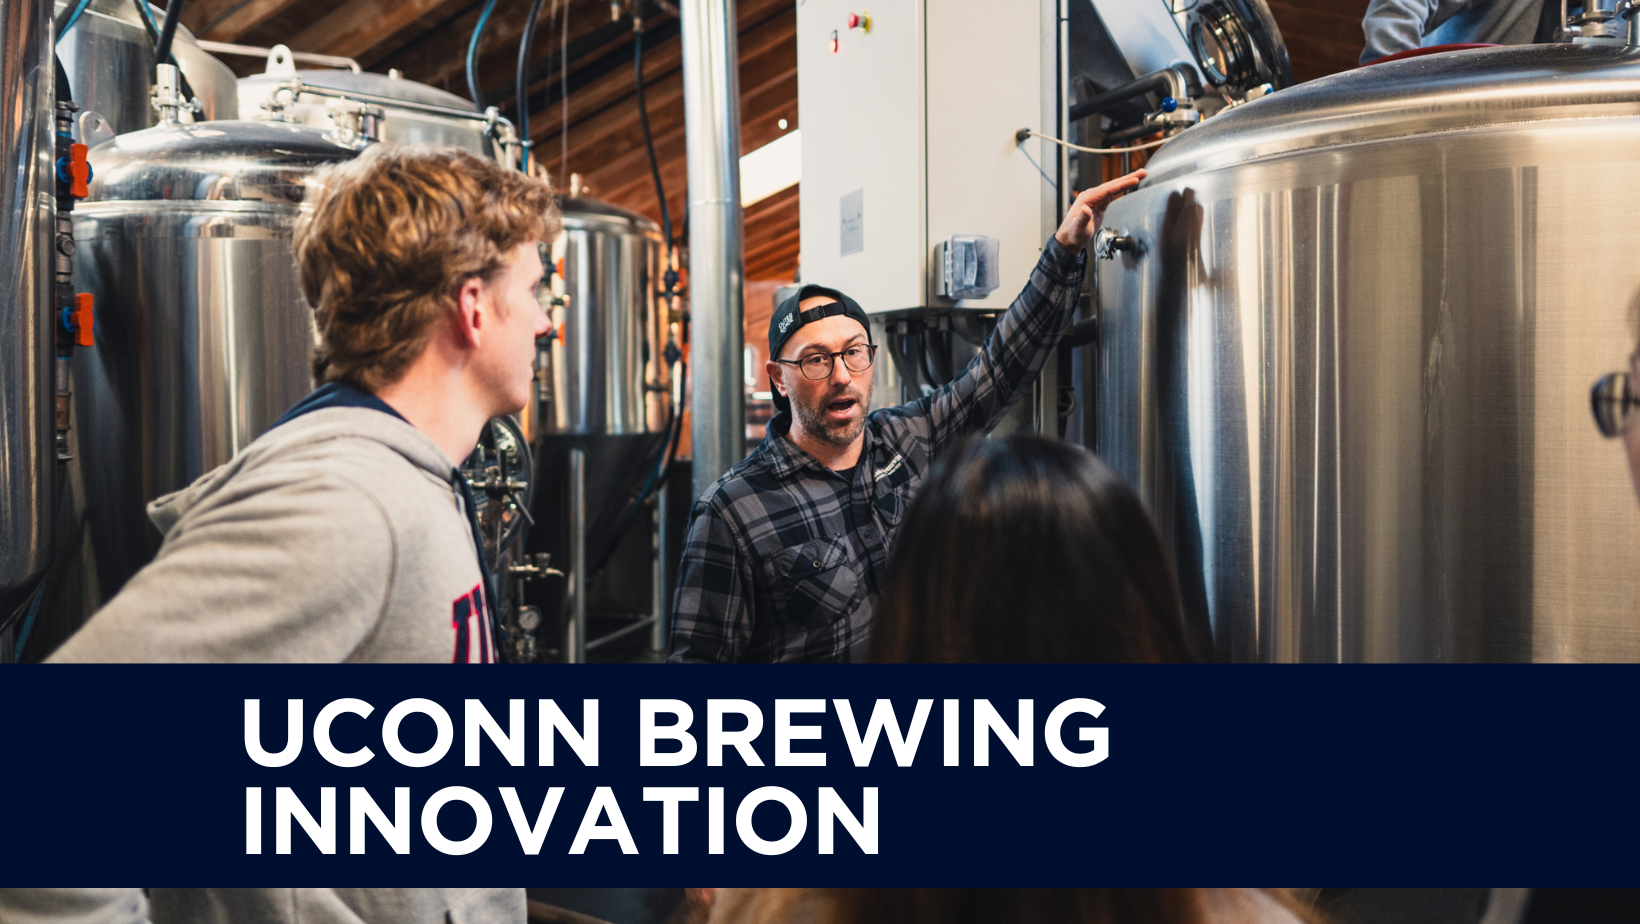 UConn Brewing Innovation text over image of a UConn students learning how to brew by Kinsmen Brewing Co. staff.